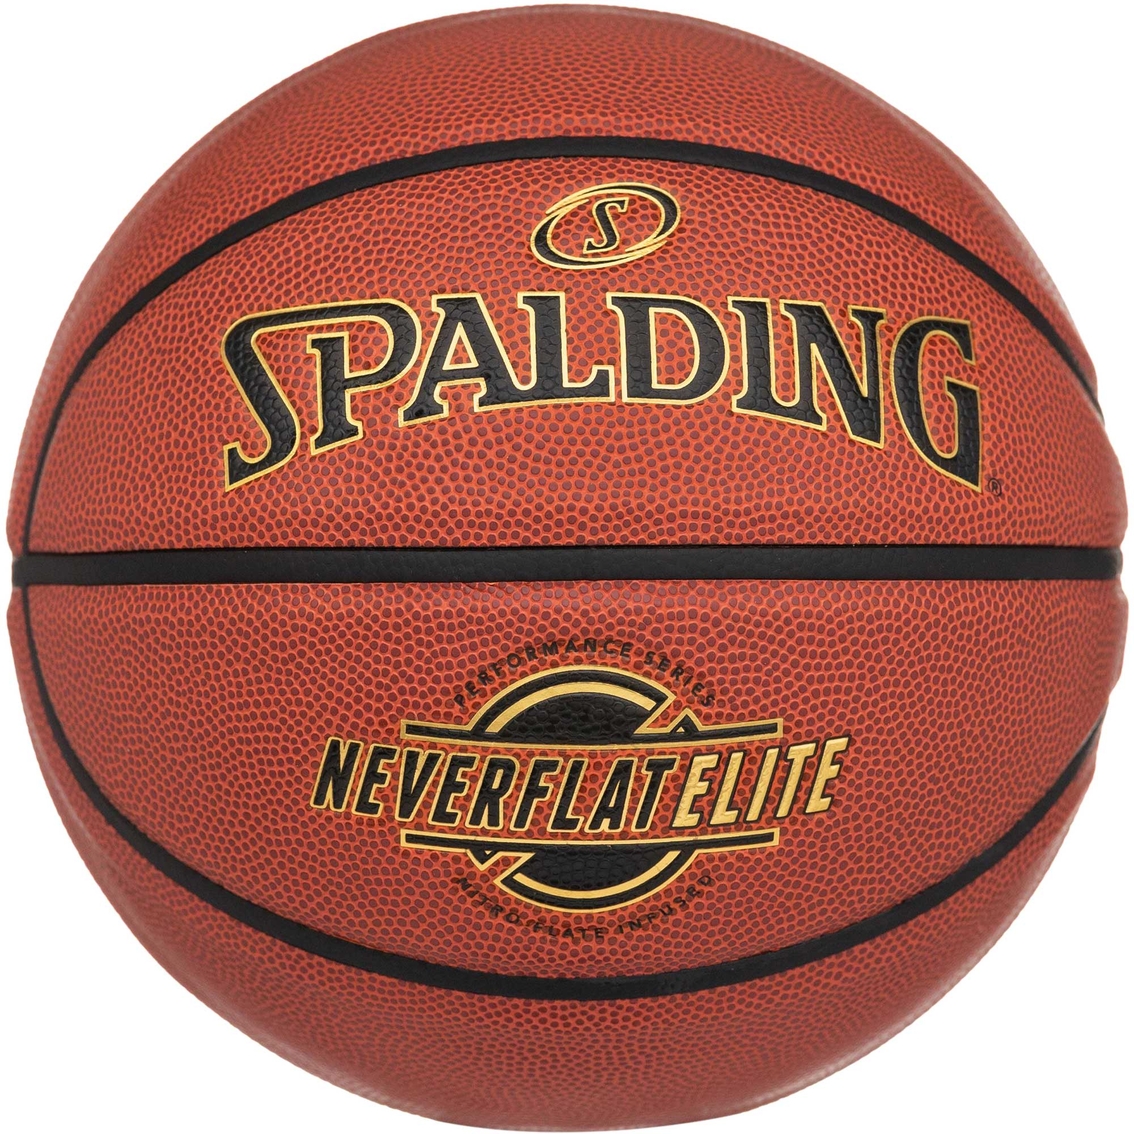 Spalding Neverflat Elite In/Out 29.5 in. Basketball